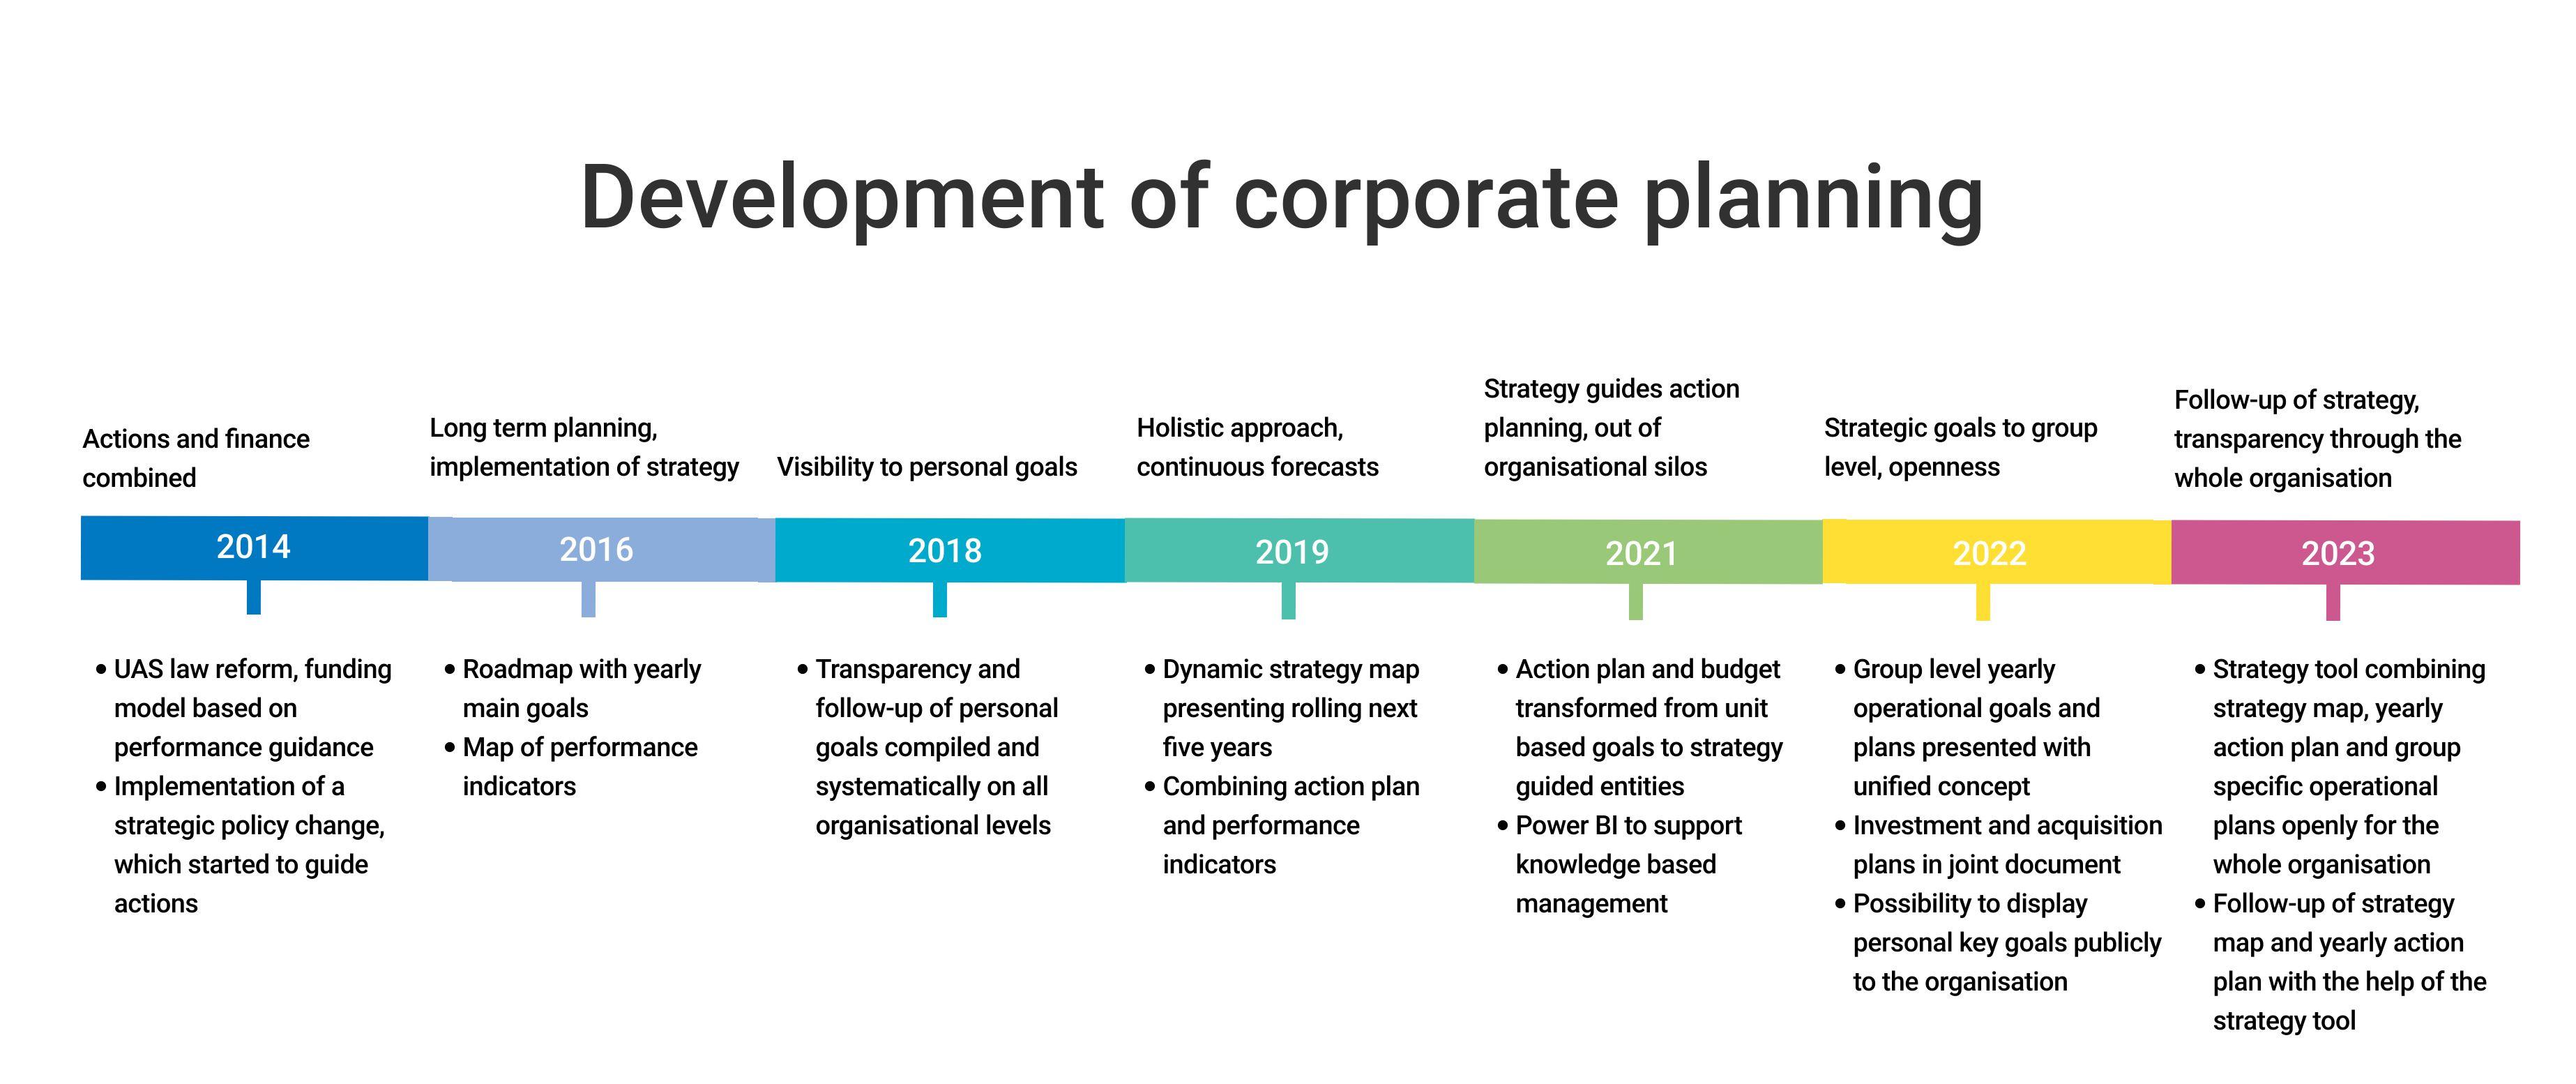 Picture 26. Development of corporate planning